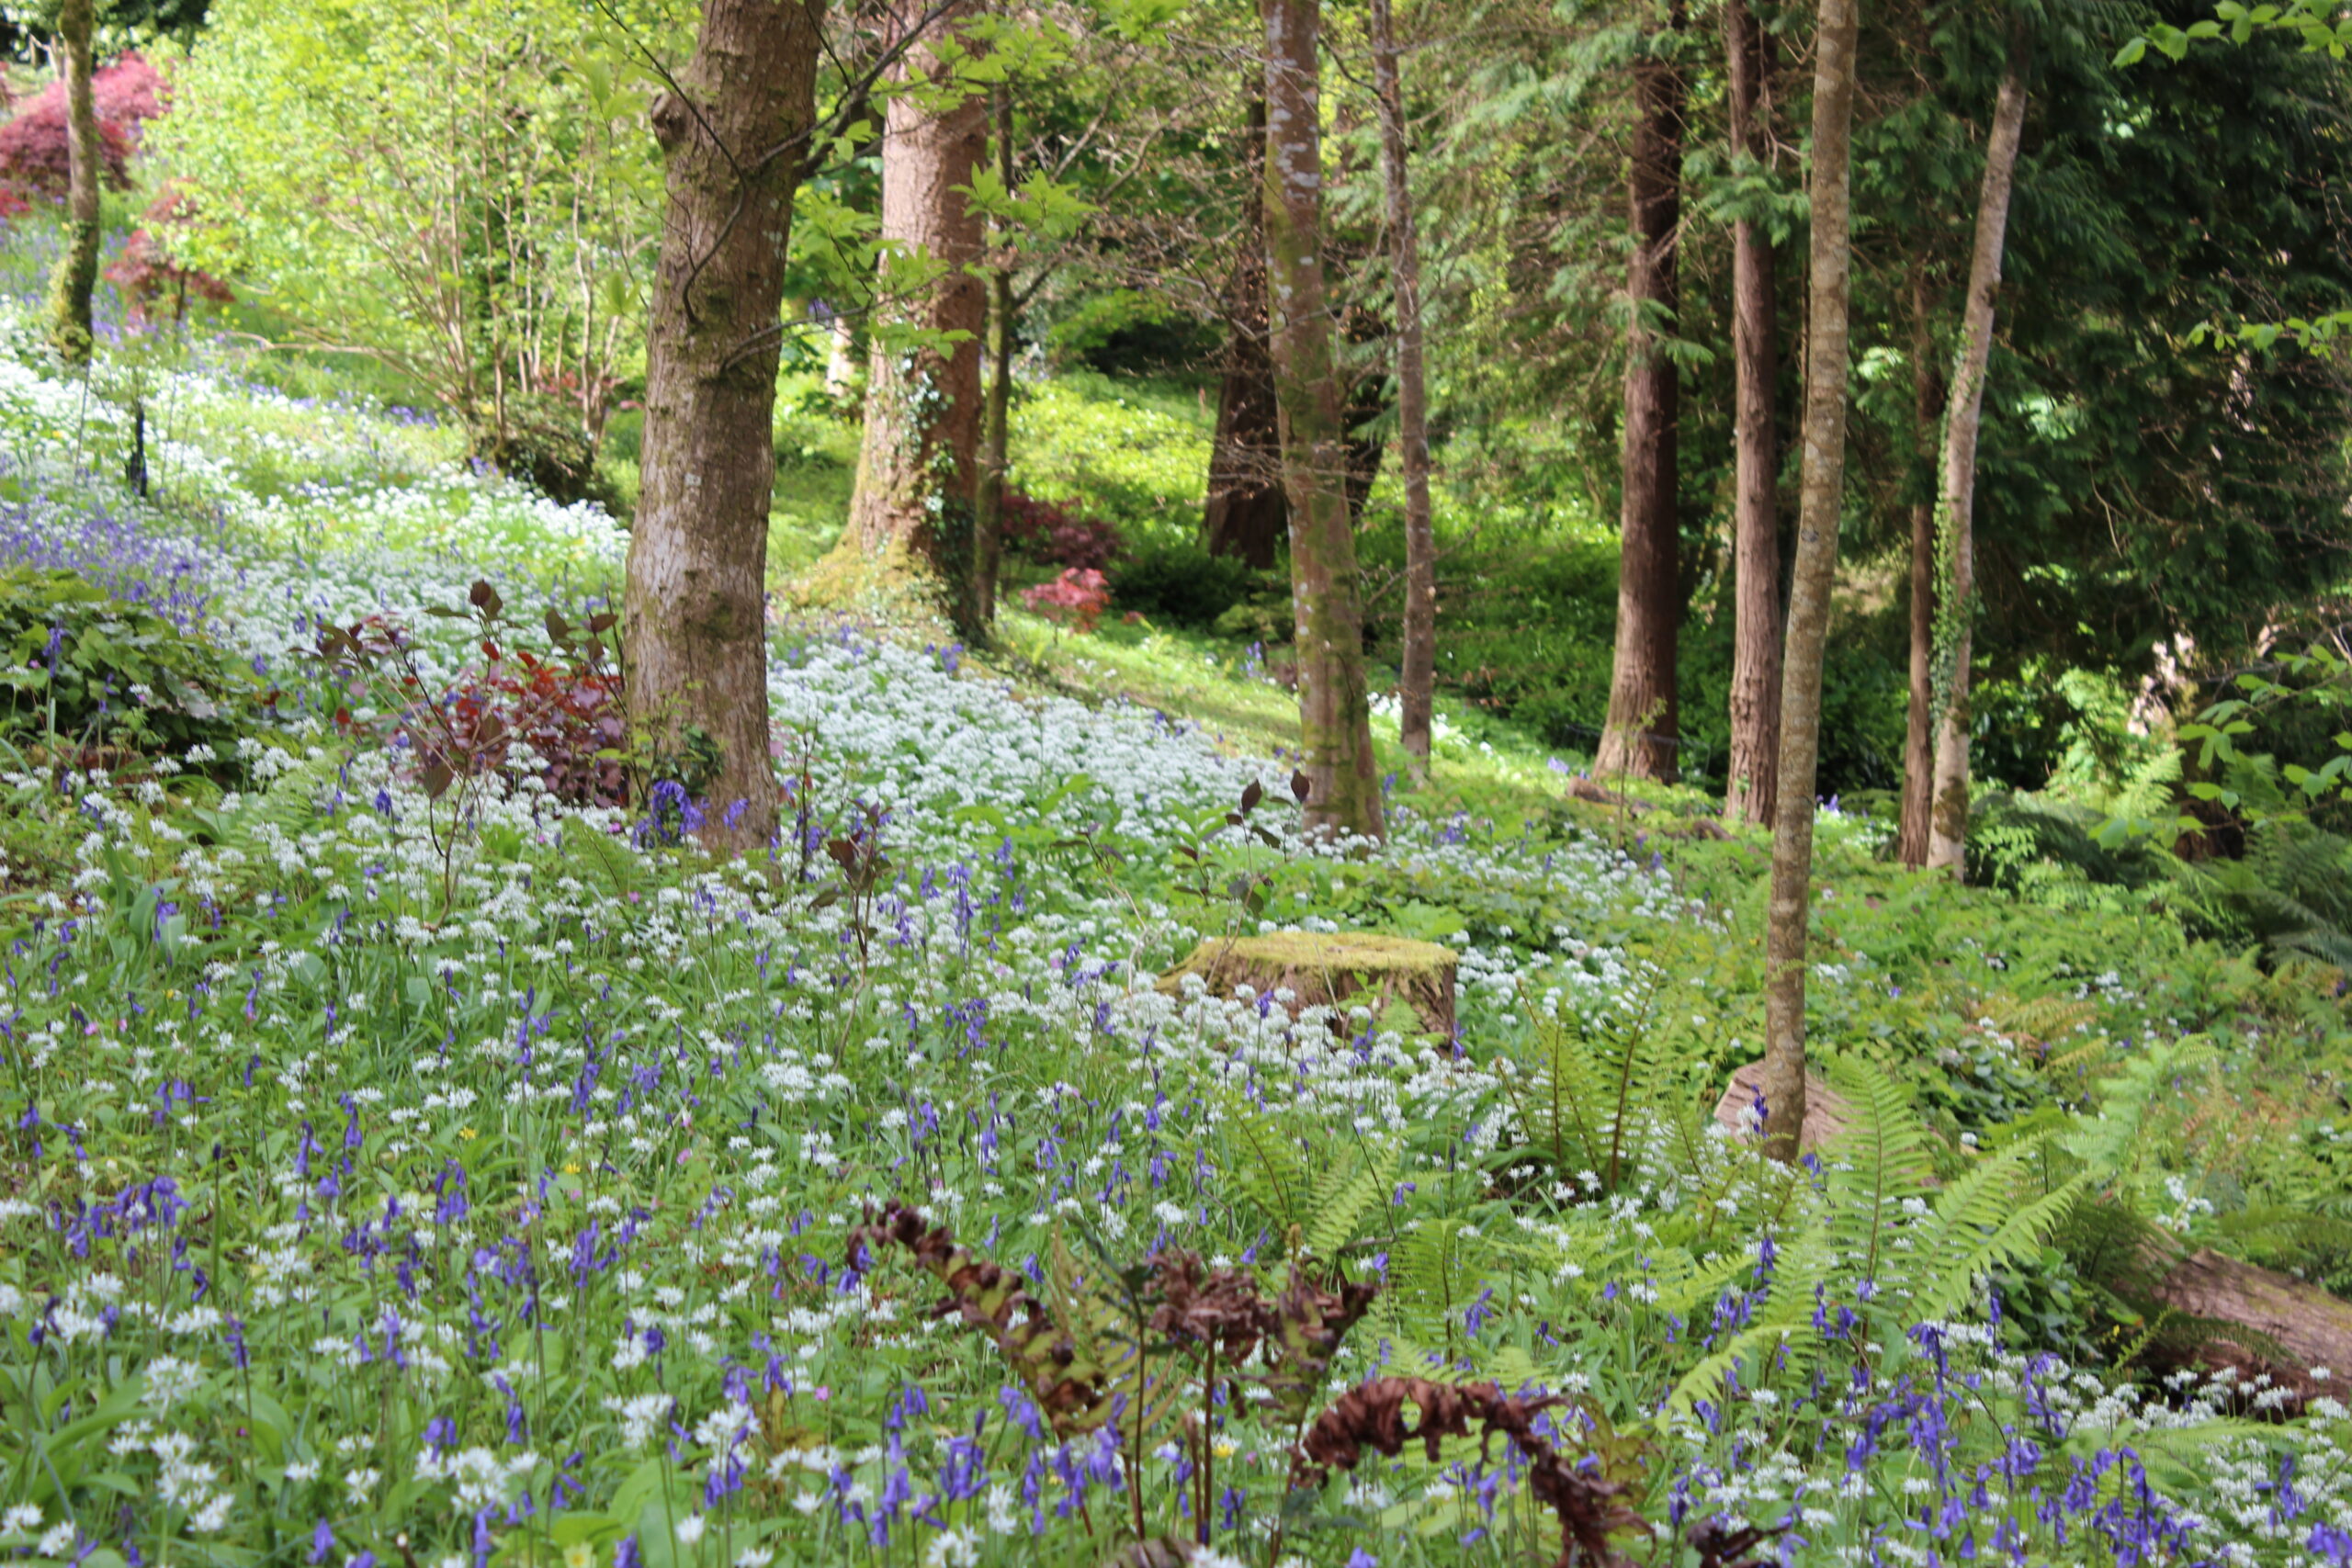 Wild garlic, bluebells and primroses carpet the woodland floor that slopes down to the pond at Enys Gardens